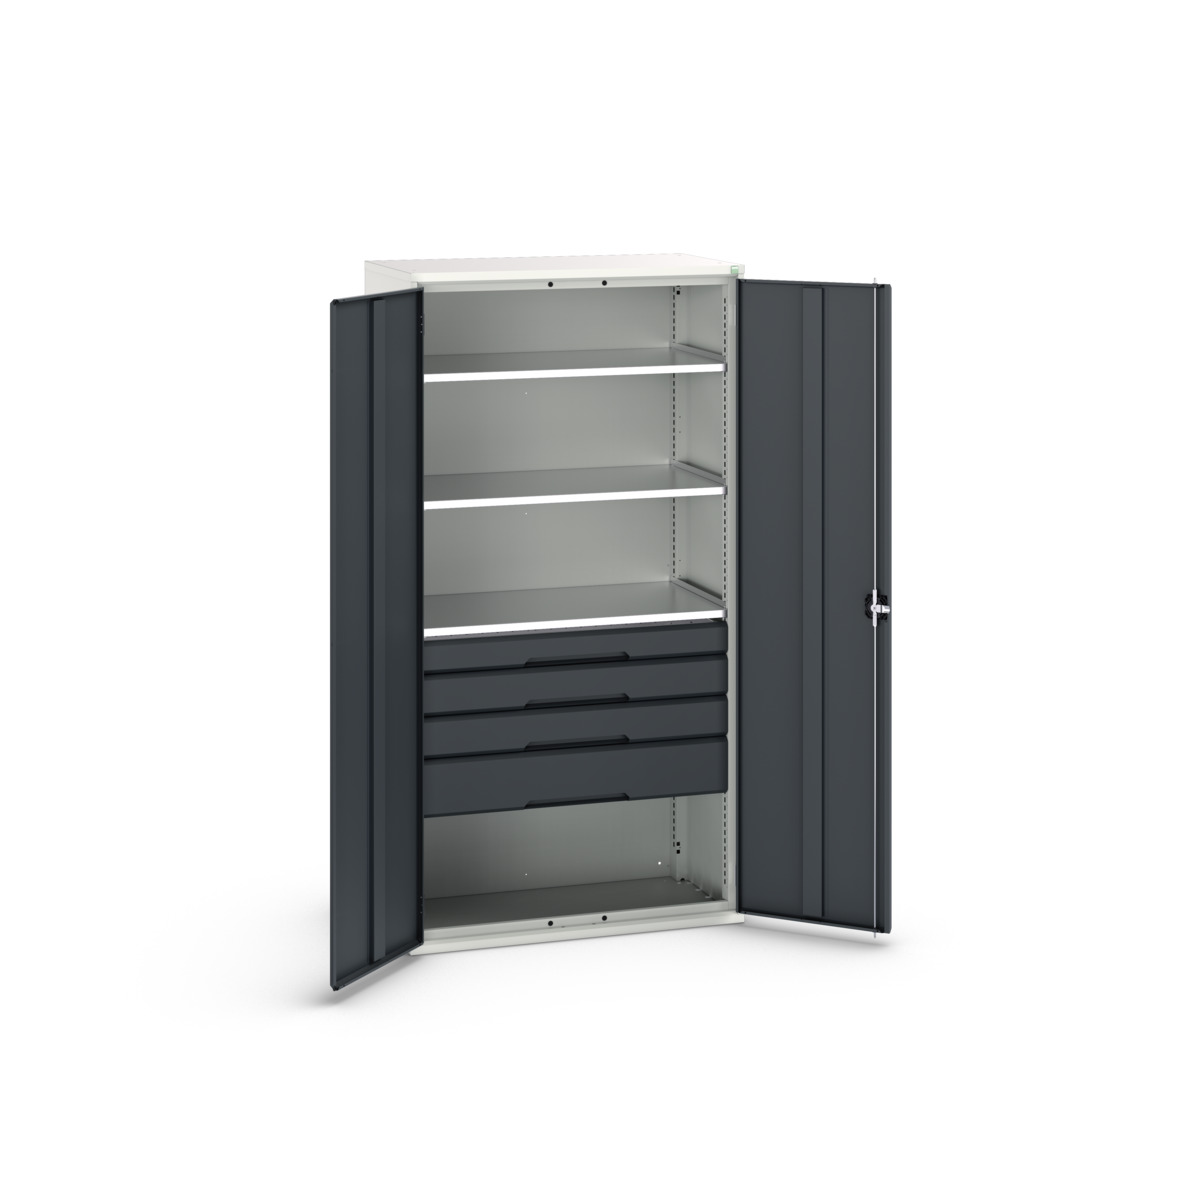 16926576.19 - verso kitted cupboard